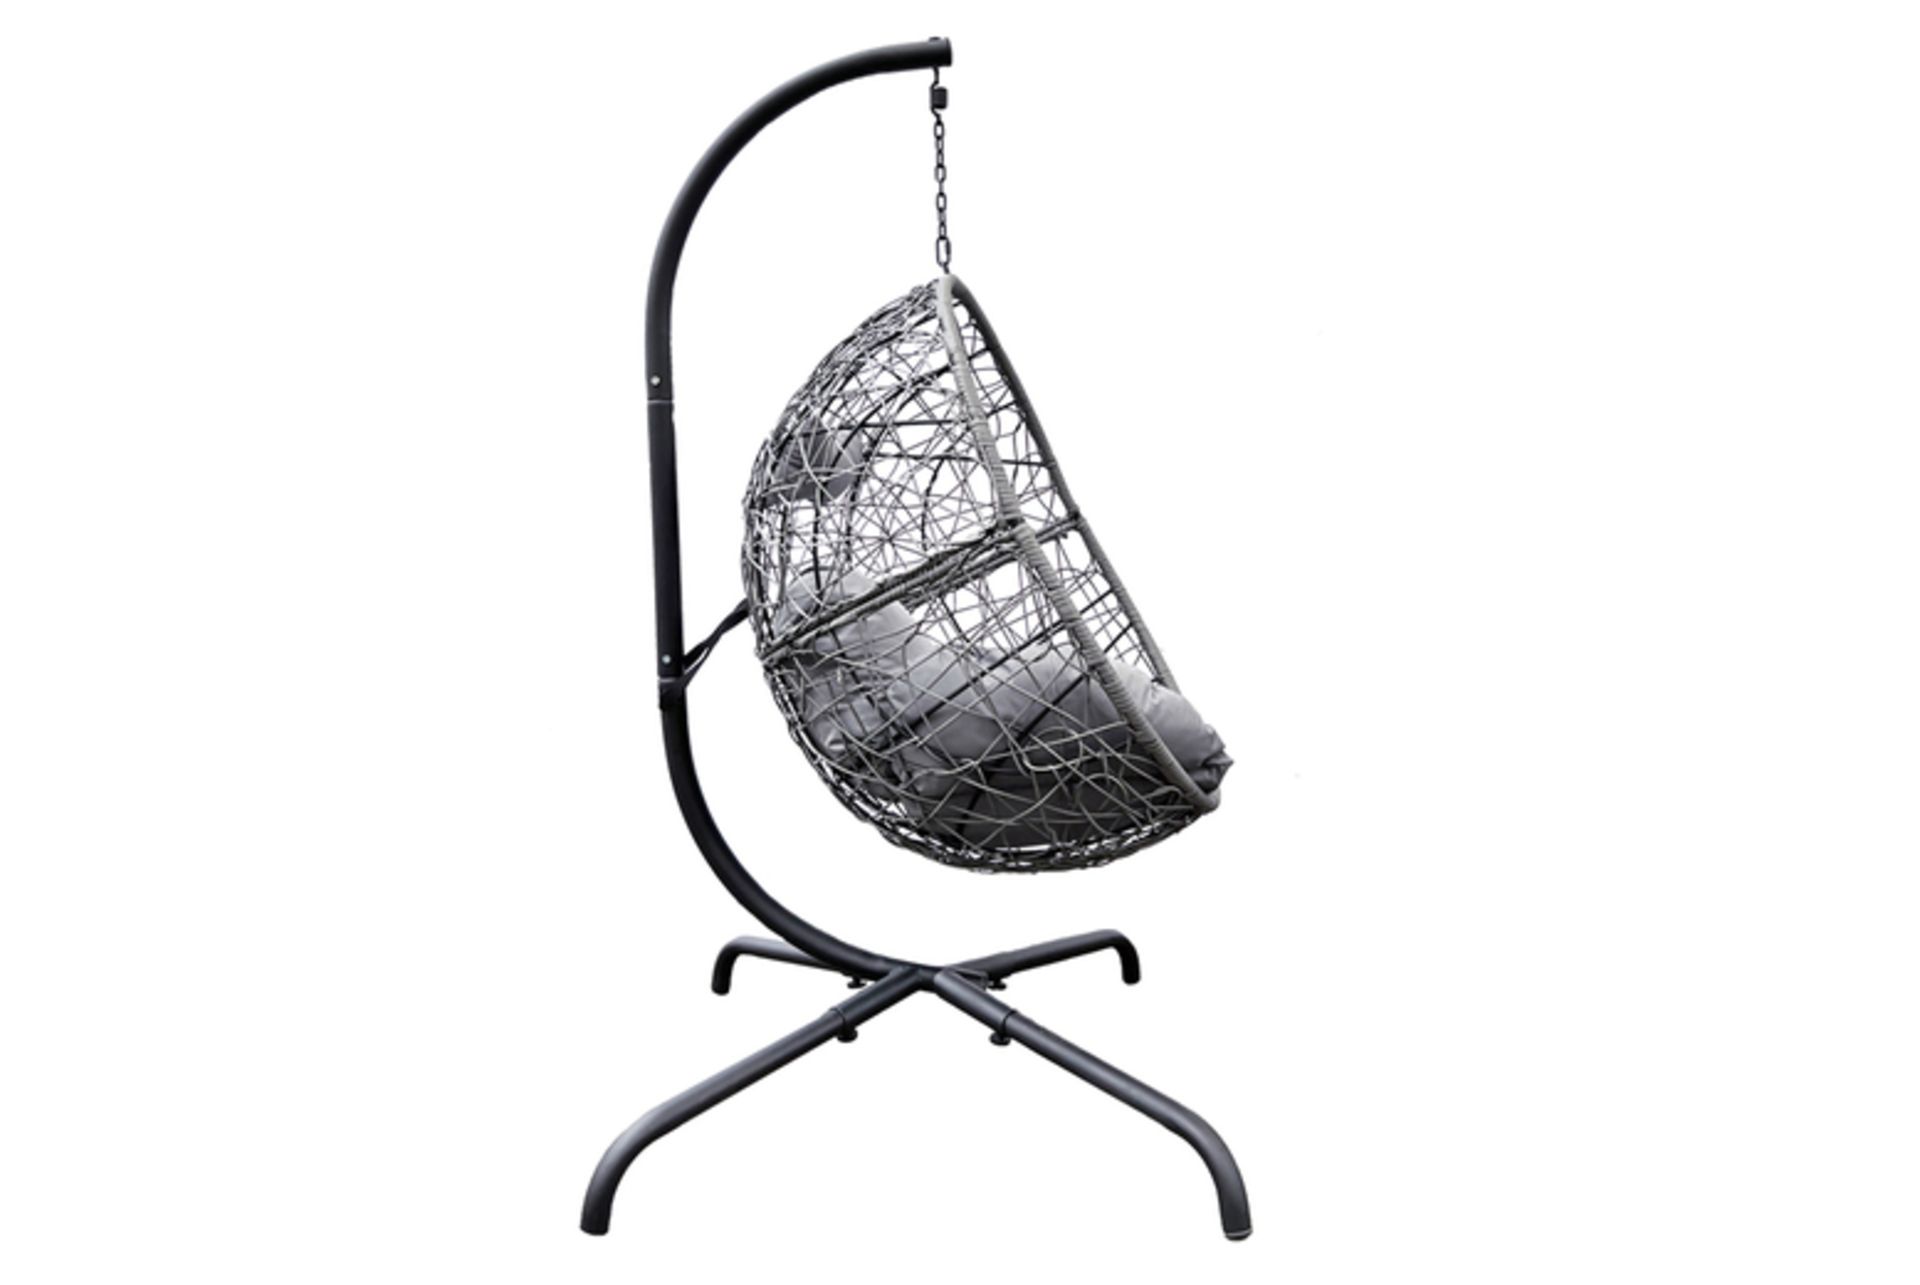 5 X NEW RATTAN HANGING EGG CHAIR WITH A CUSHION AND PILLOW - GREY - Image 3 of 3